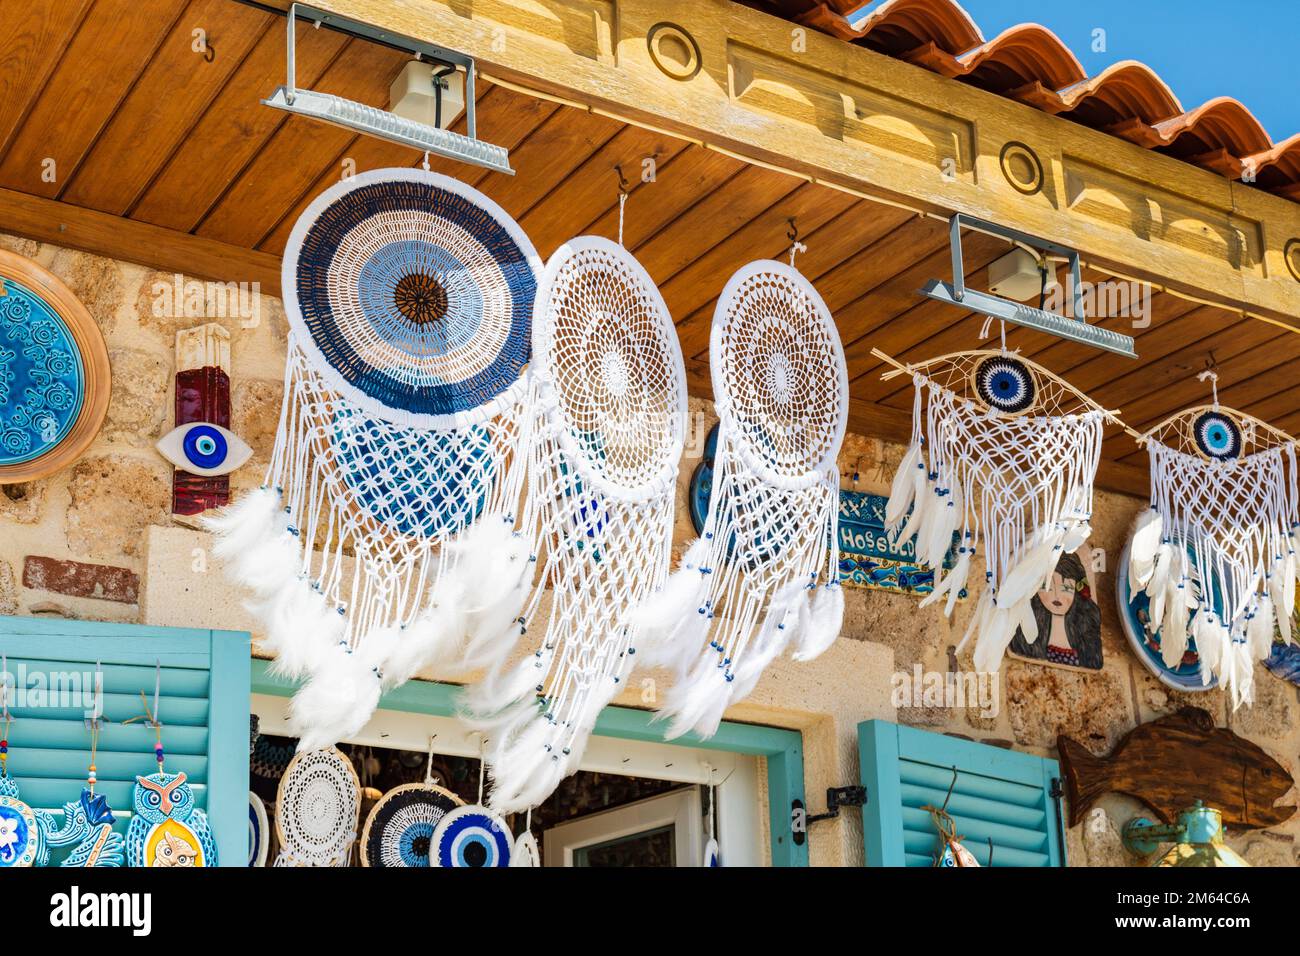 A dream catcher net art hanging on the ceilings Stock Photo